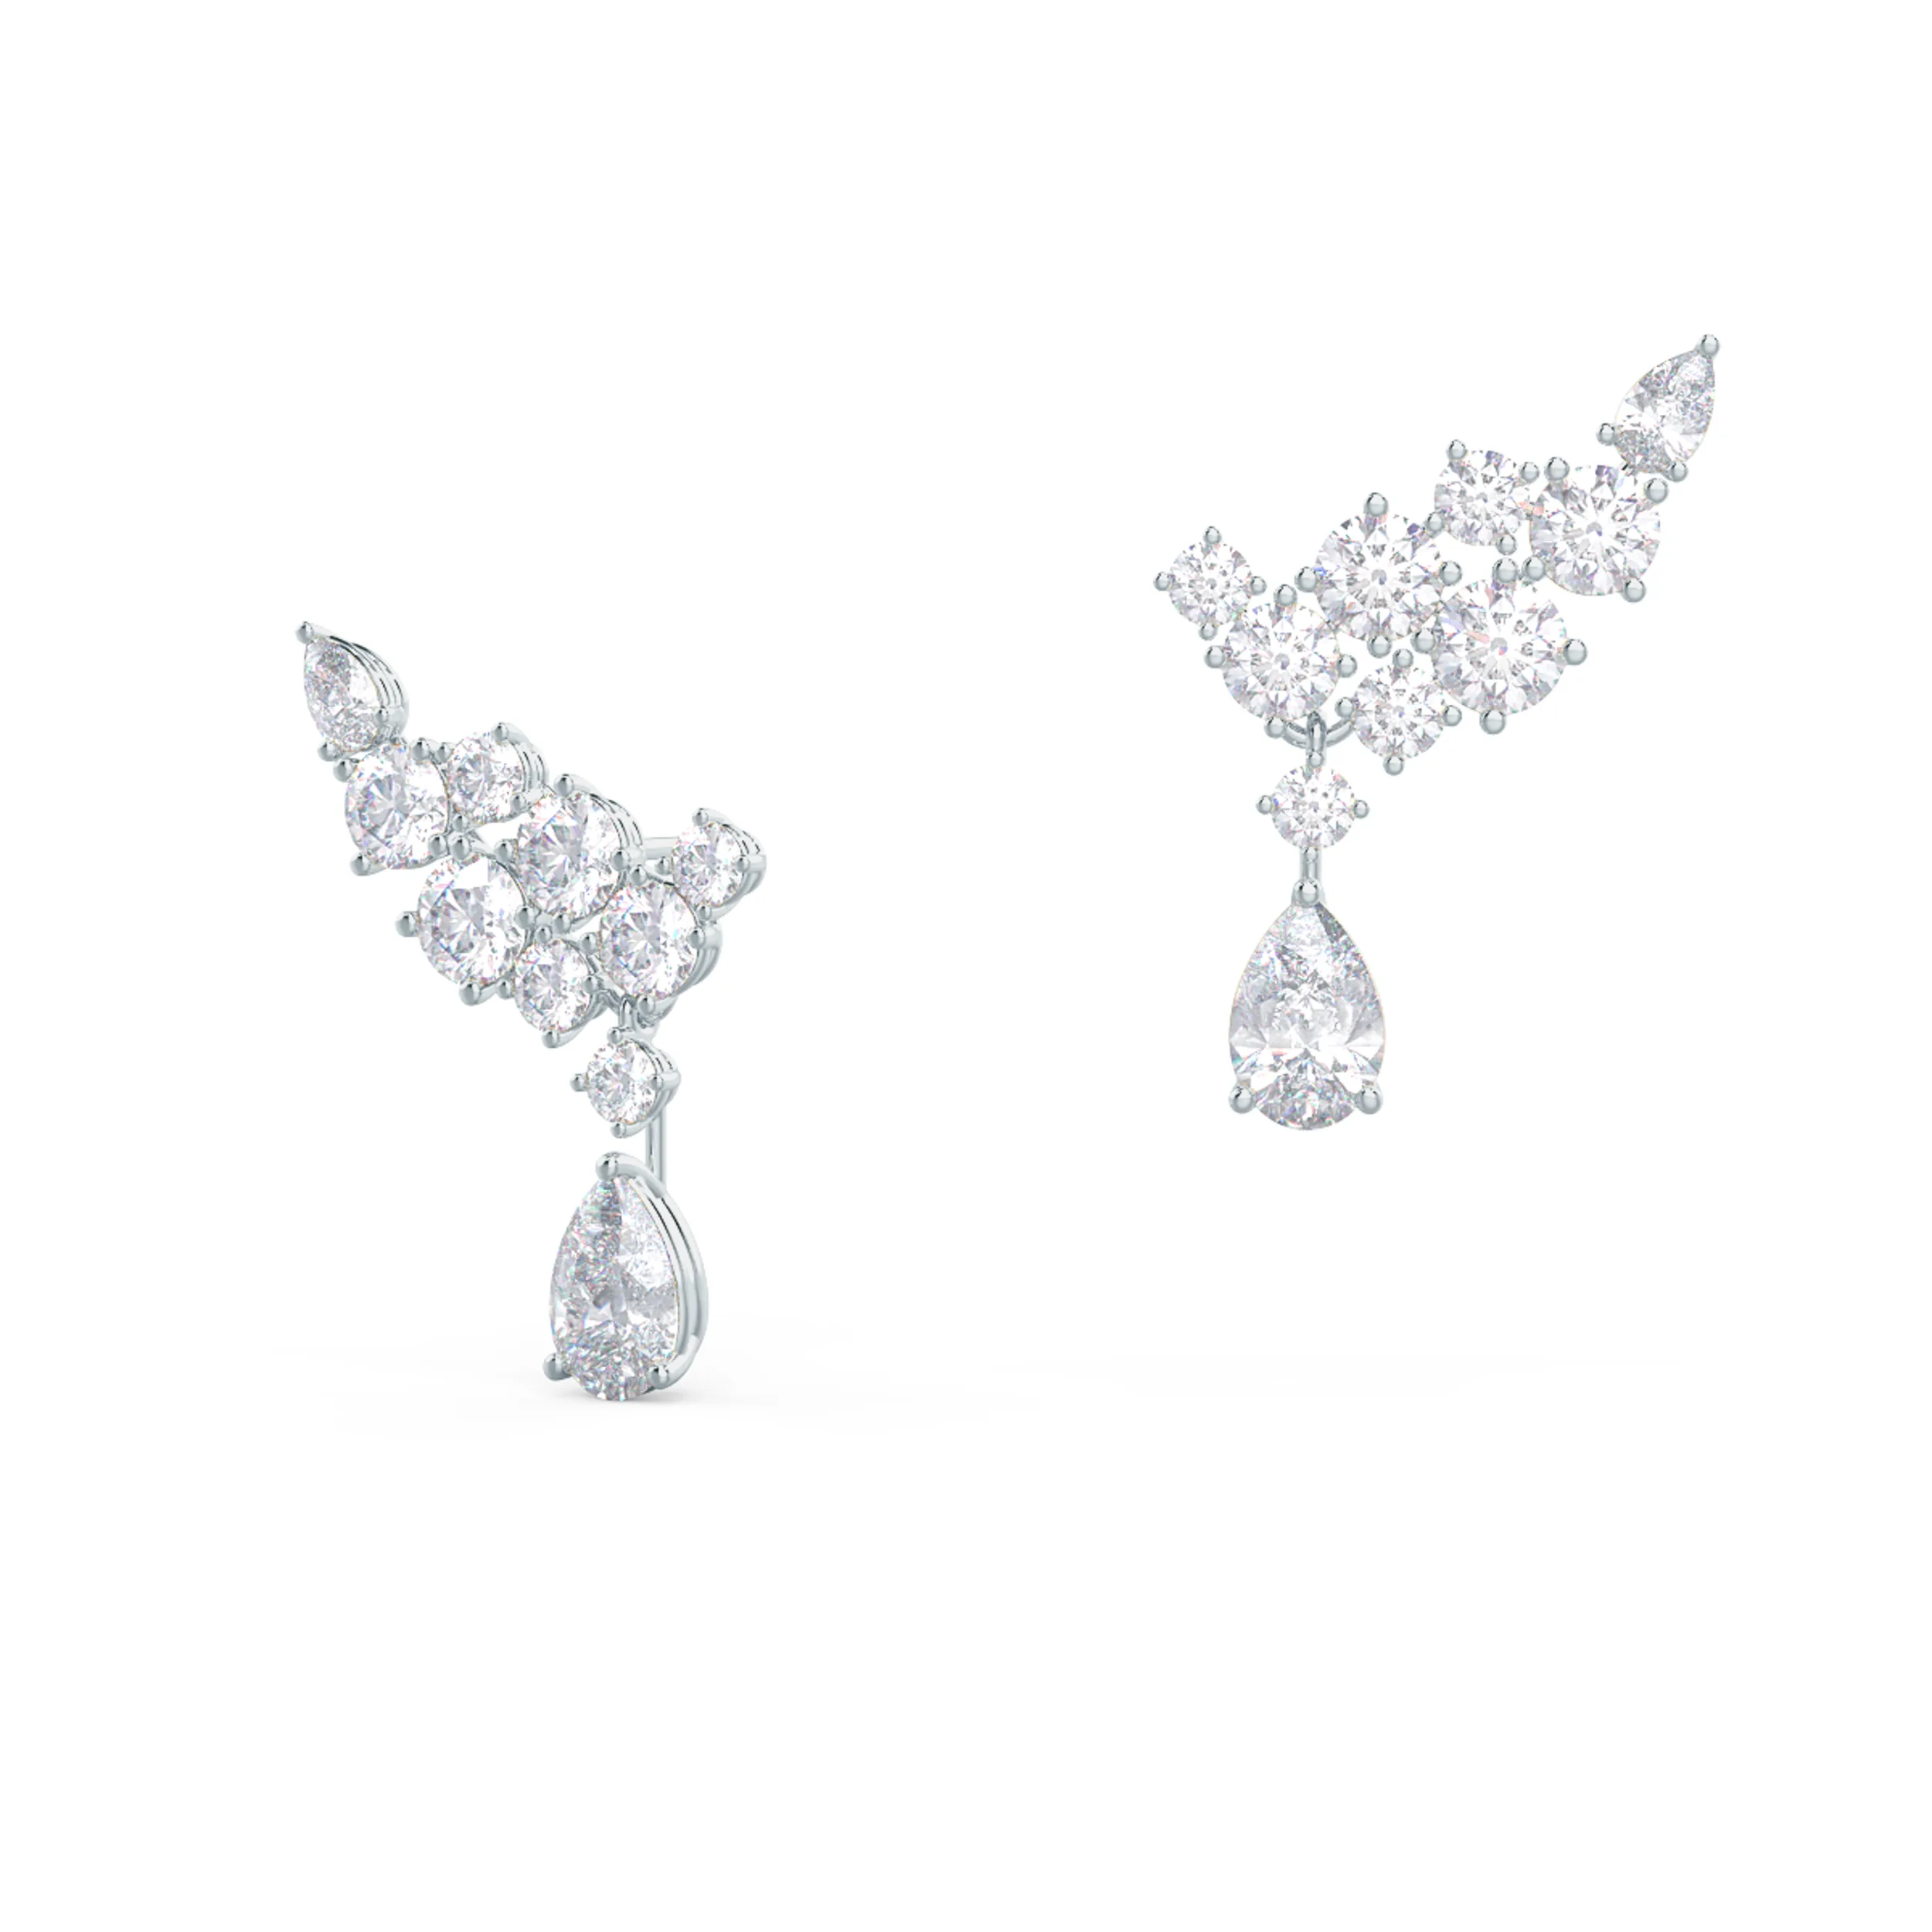 3-carat-round-and-pear-drop-earrings_1670806524742-49QZXISQ58624Z7KQLCL